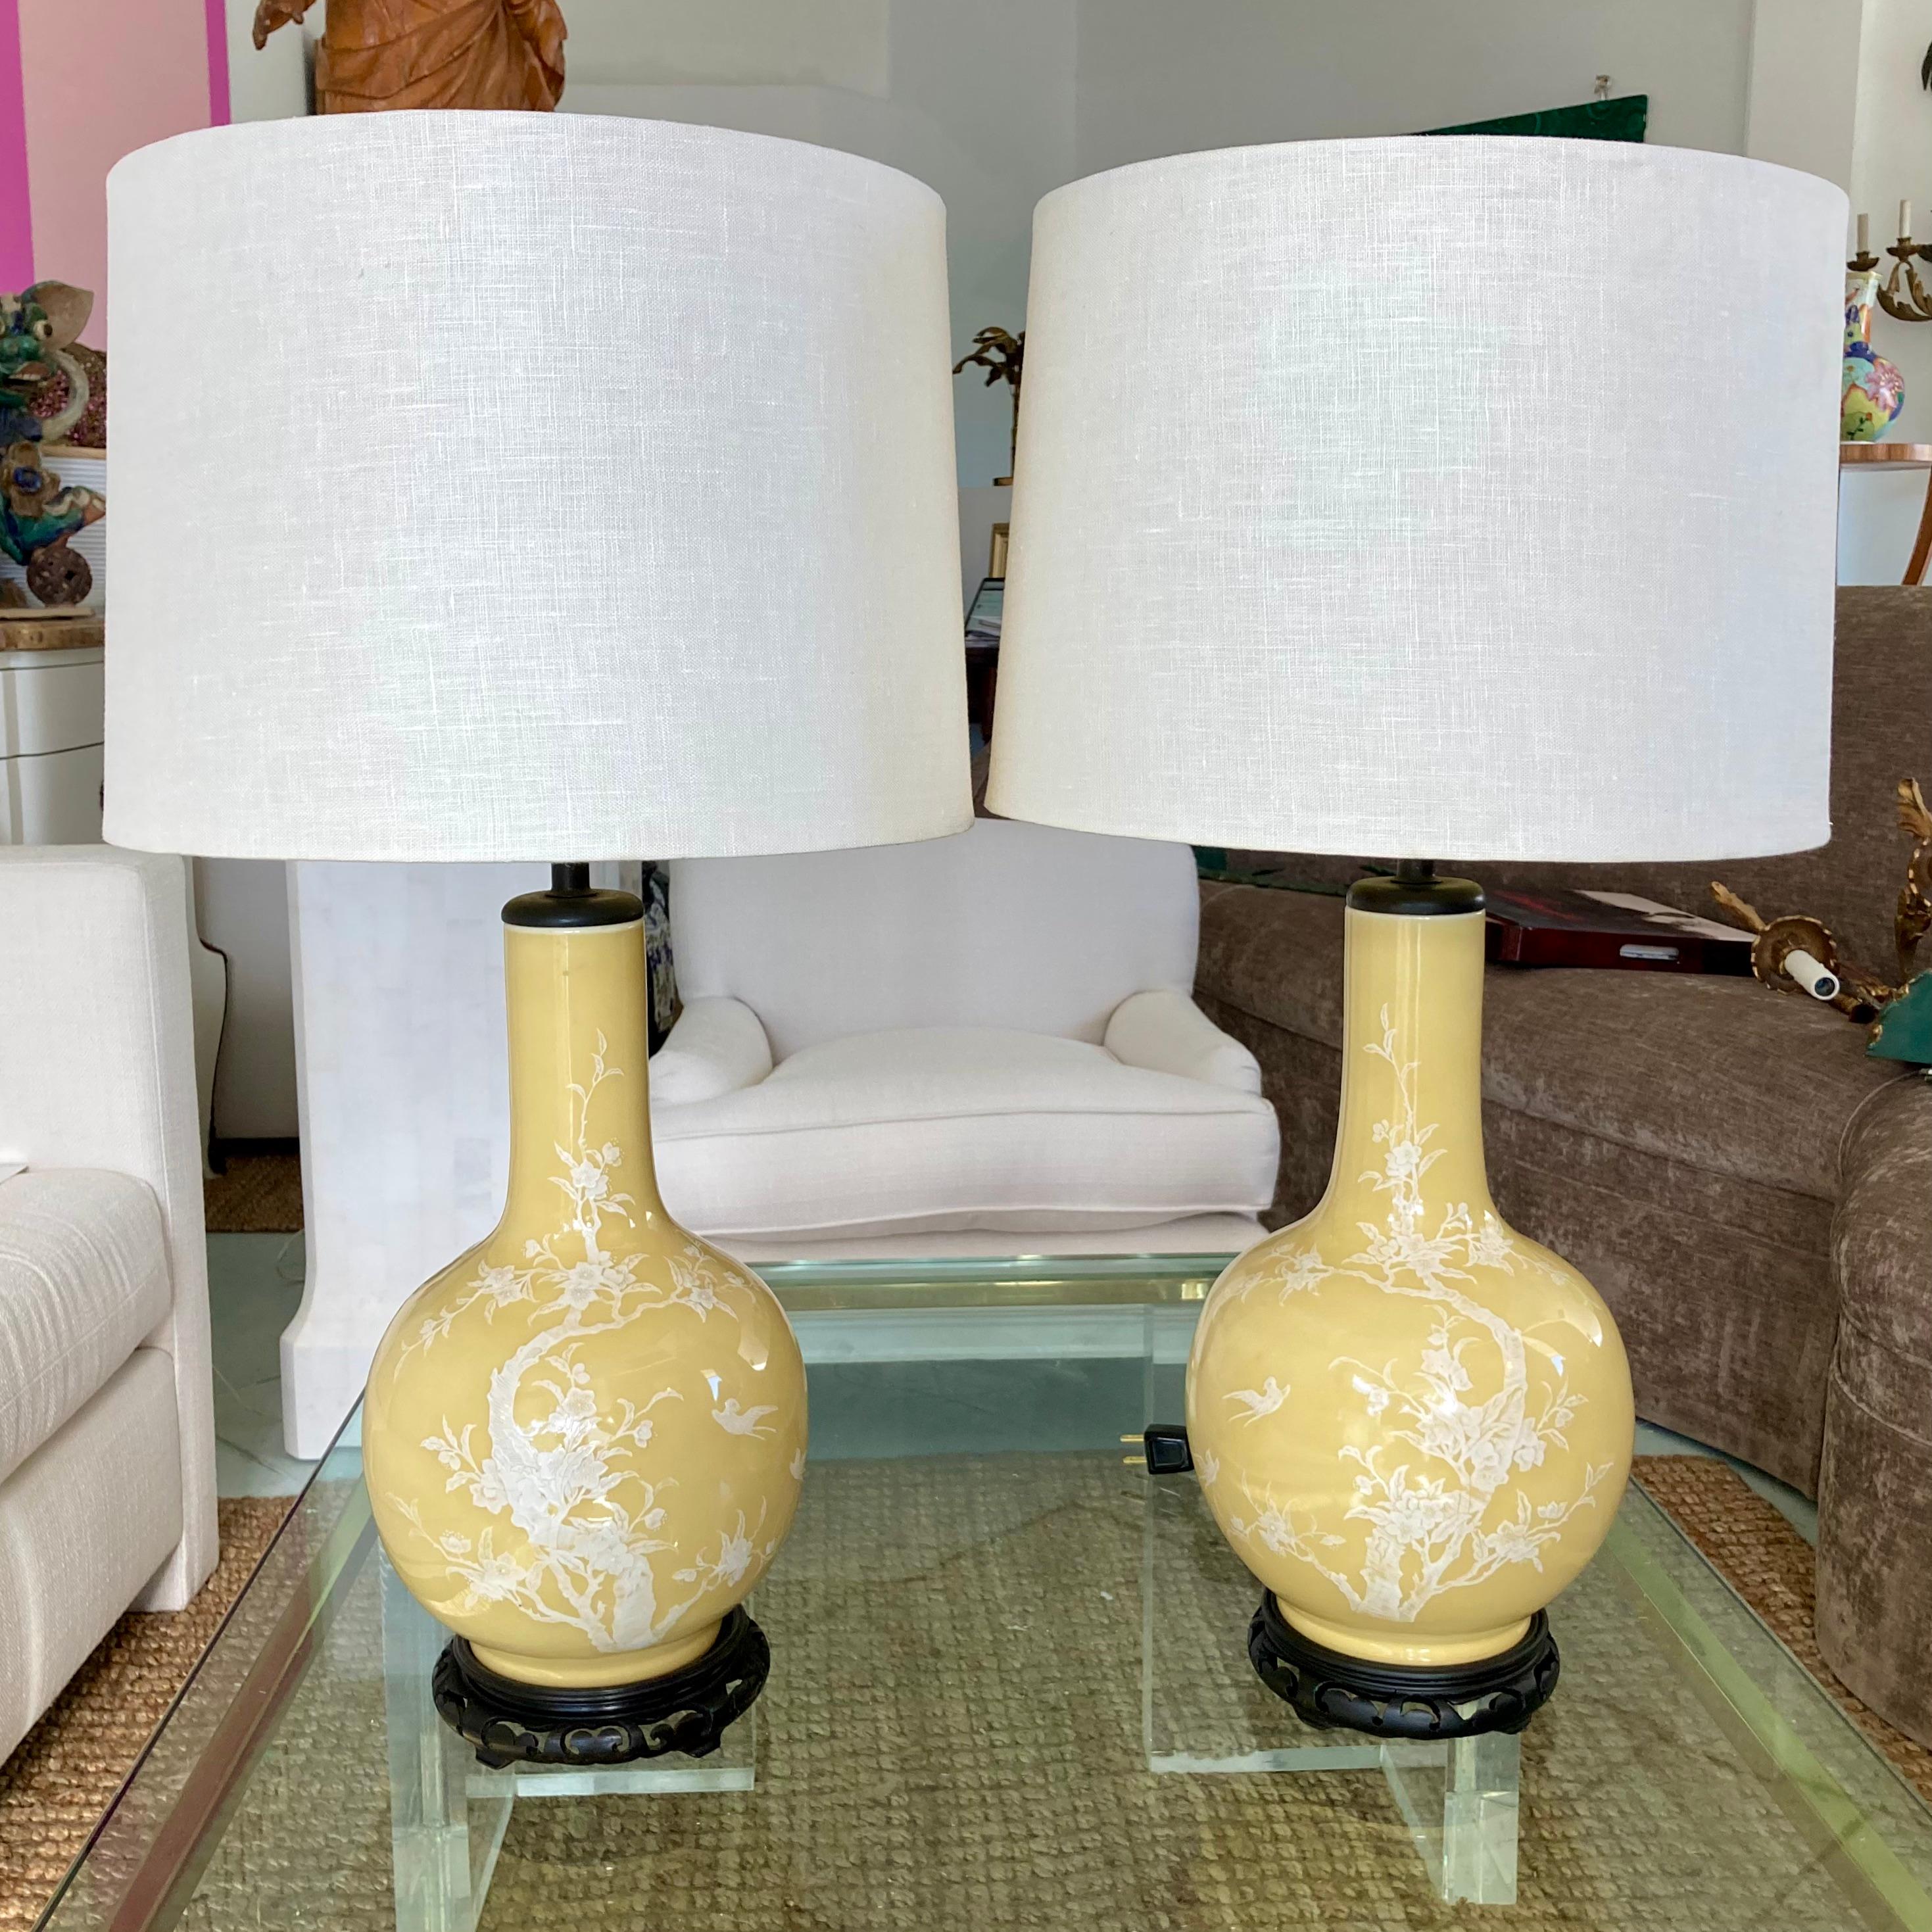 Beautiful pair of yellow Asian porcelain chinoiserie table lamps on carved wood bases. Add them to your chinoiserie inspired interiors and table tops.